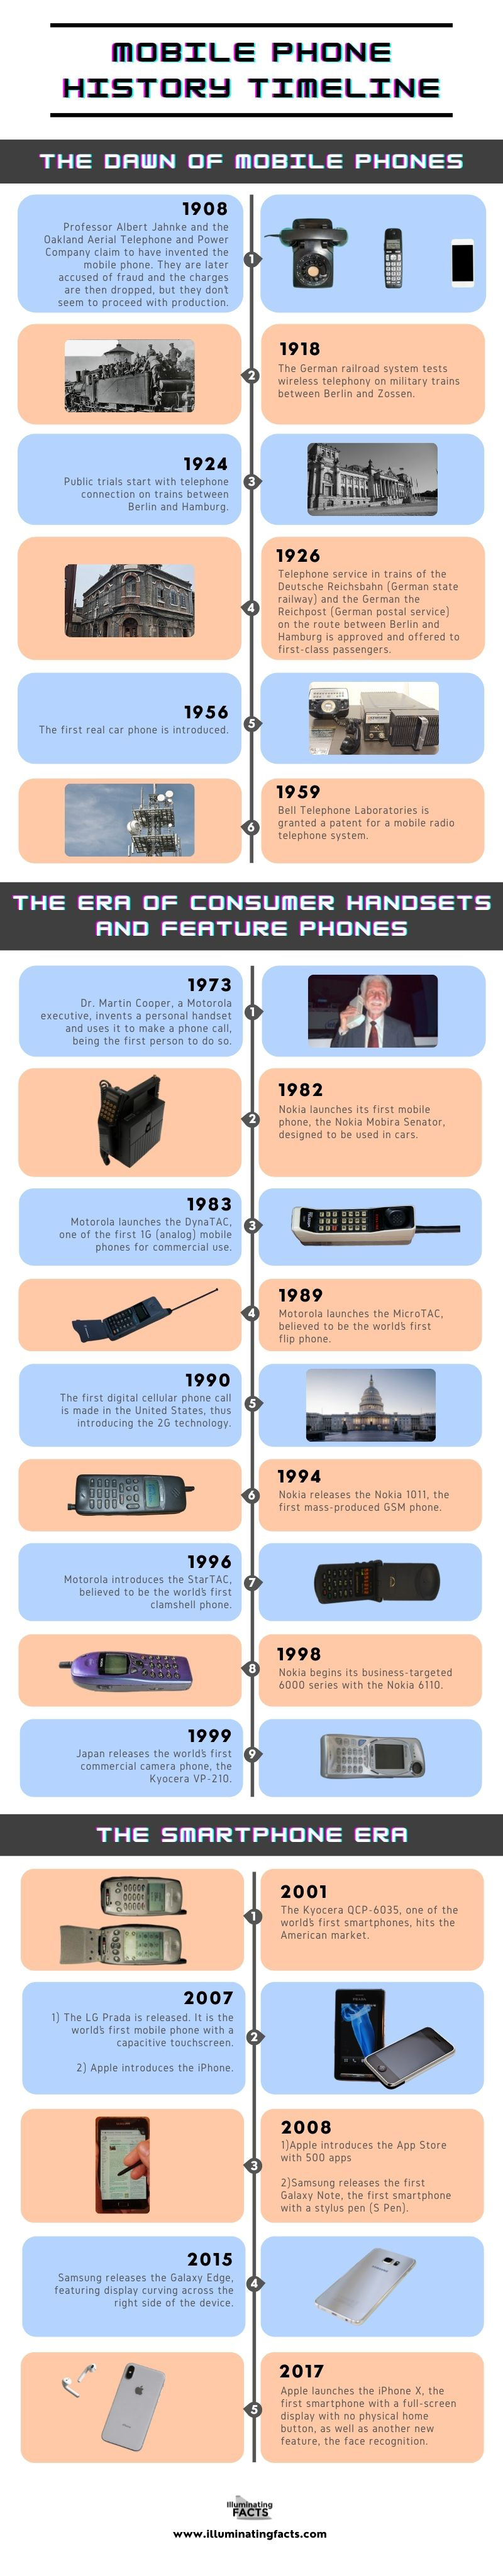 Mobile phone history timeline Infographic